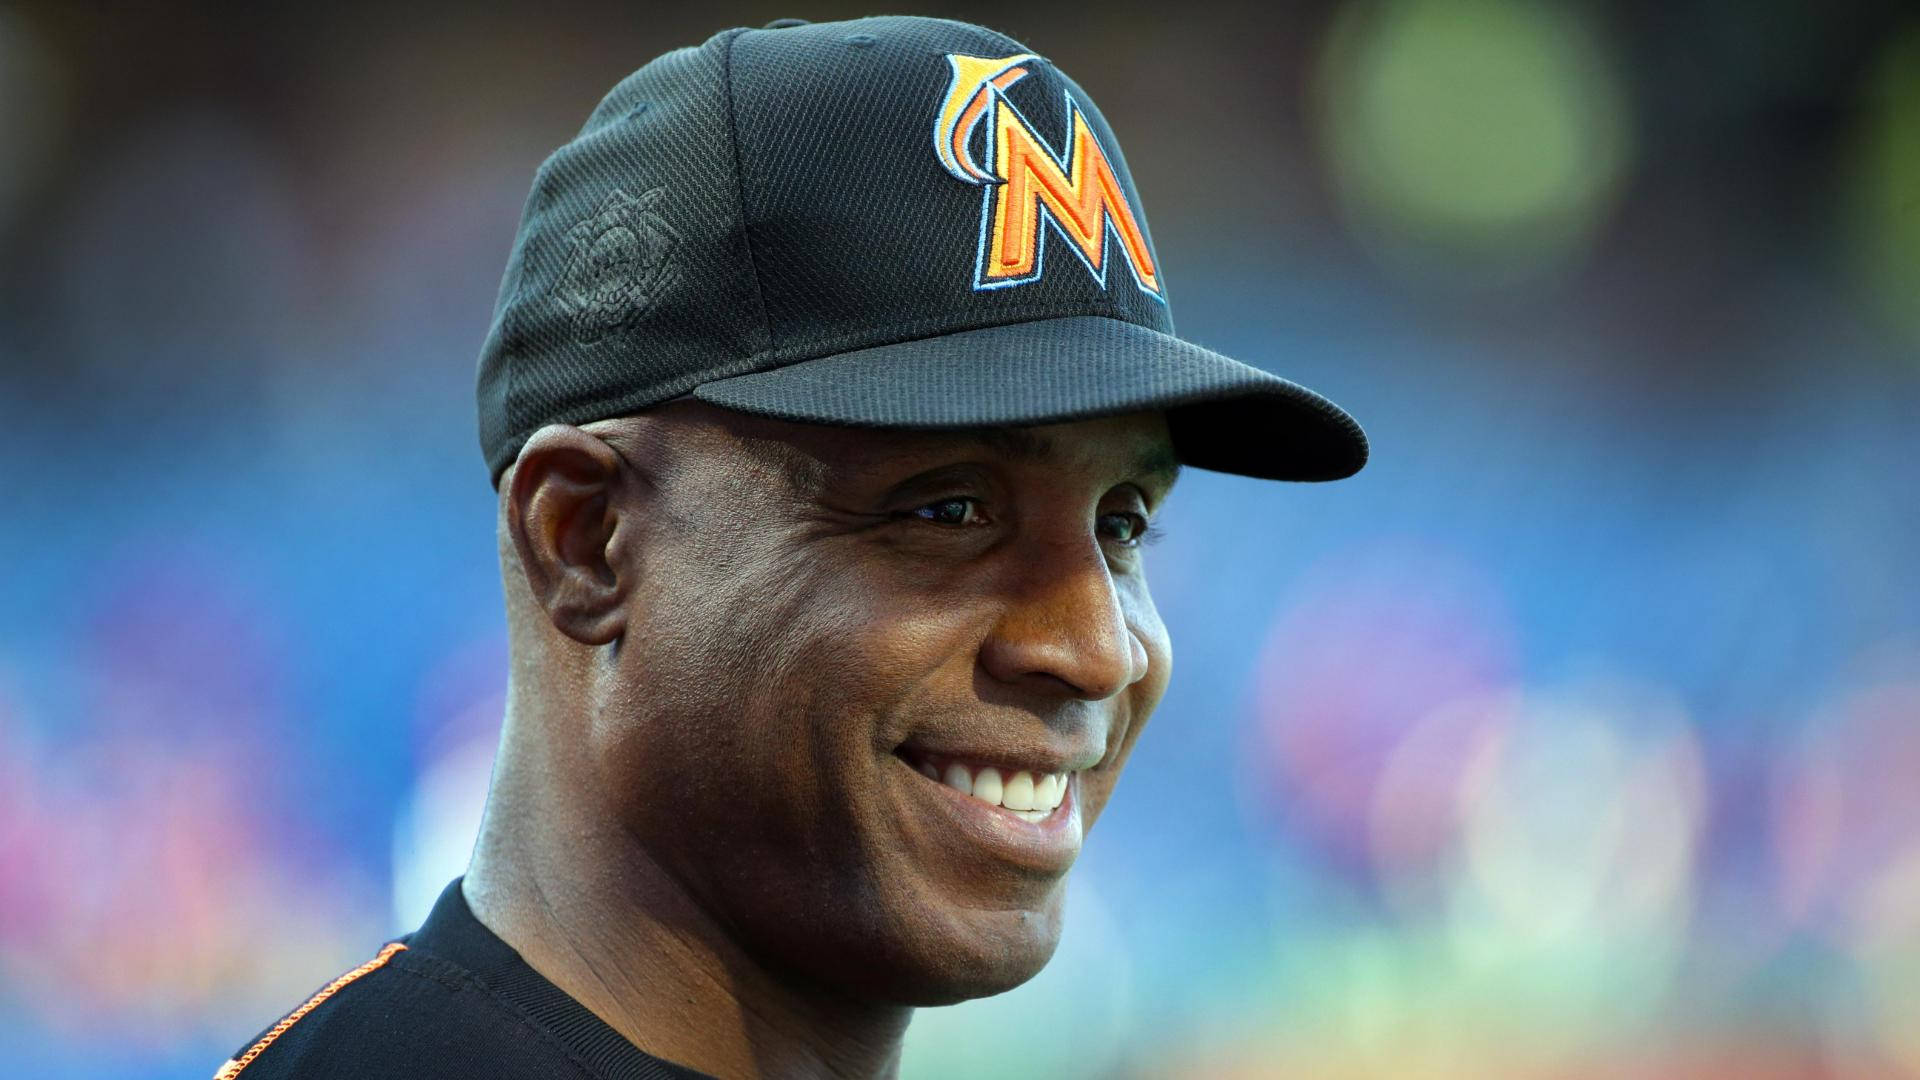 Barry Bonds With Black Cap Background